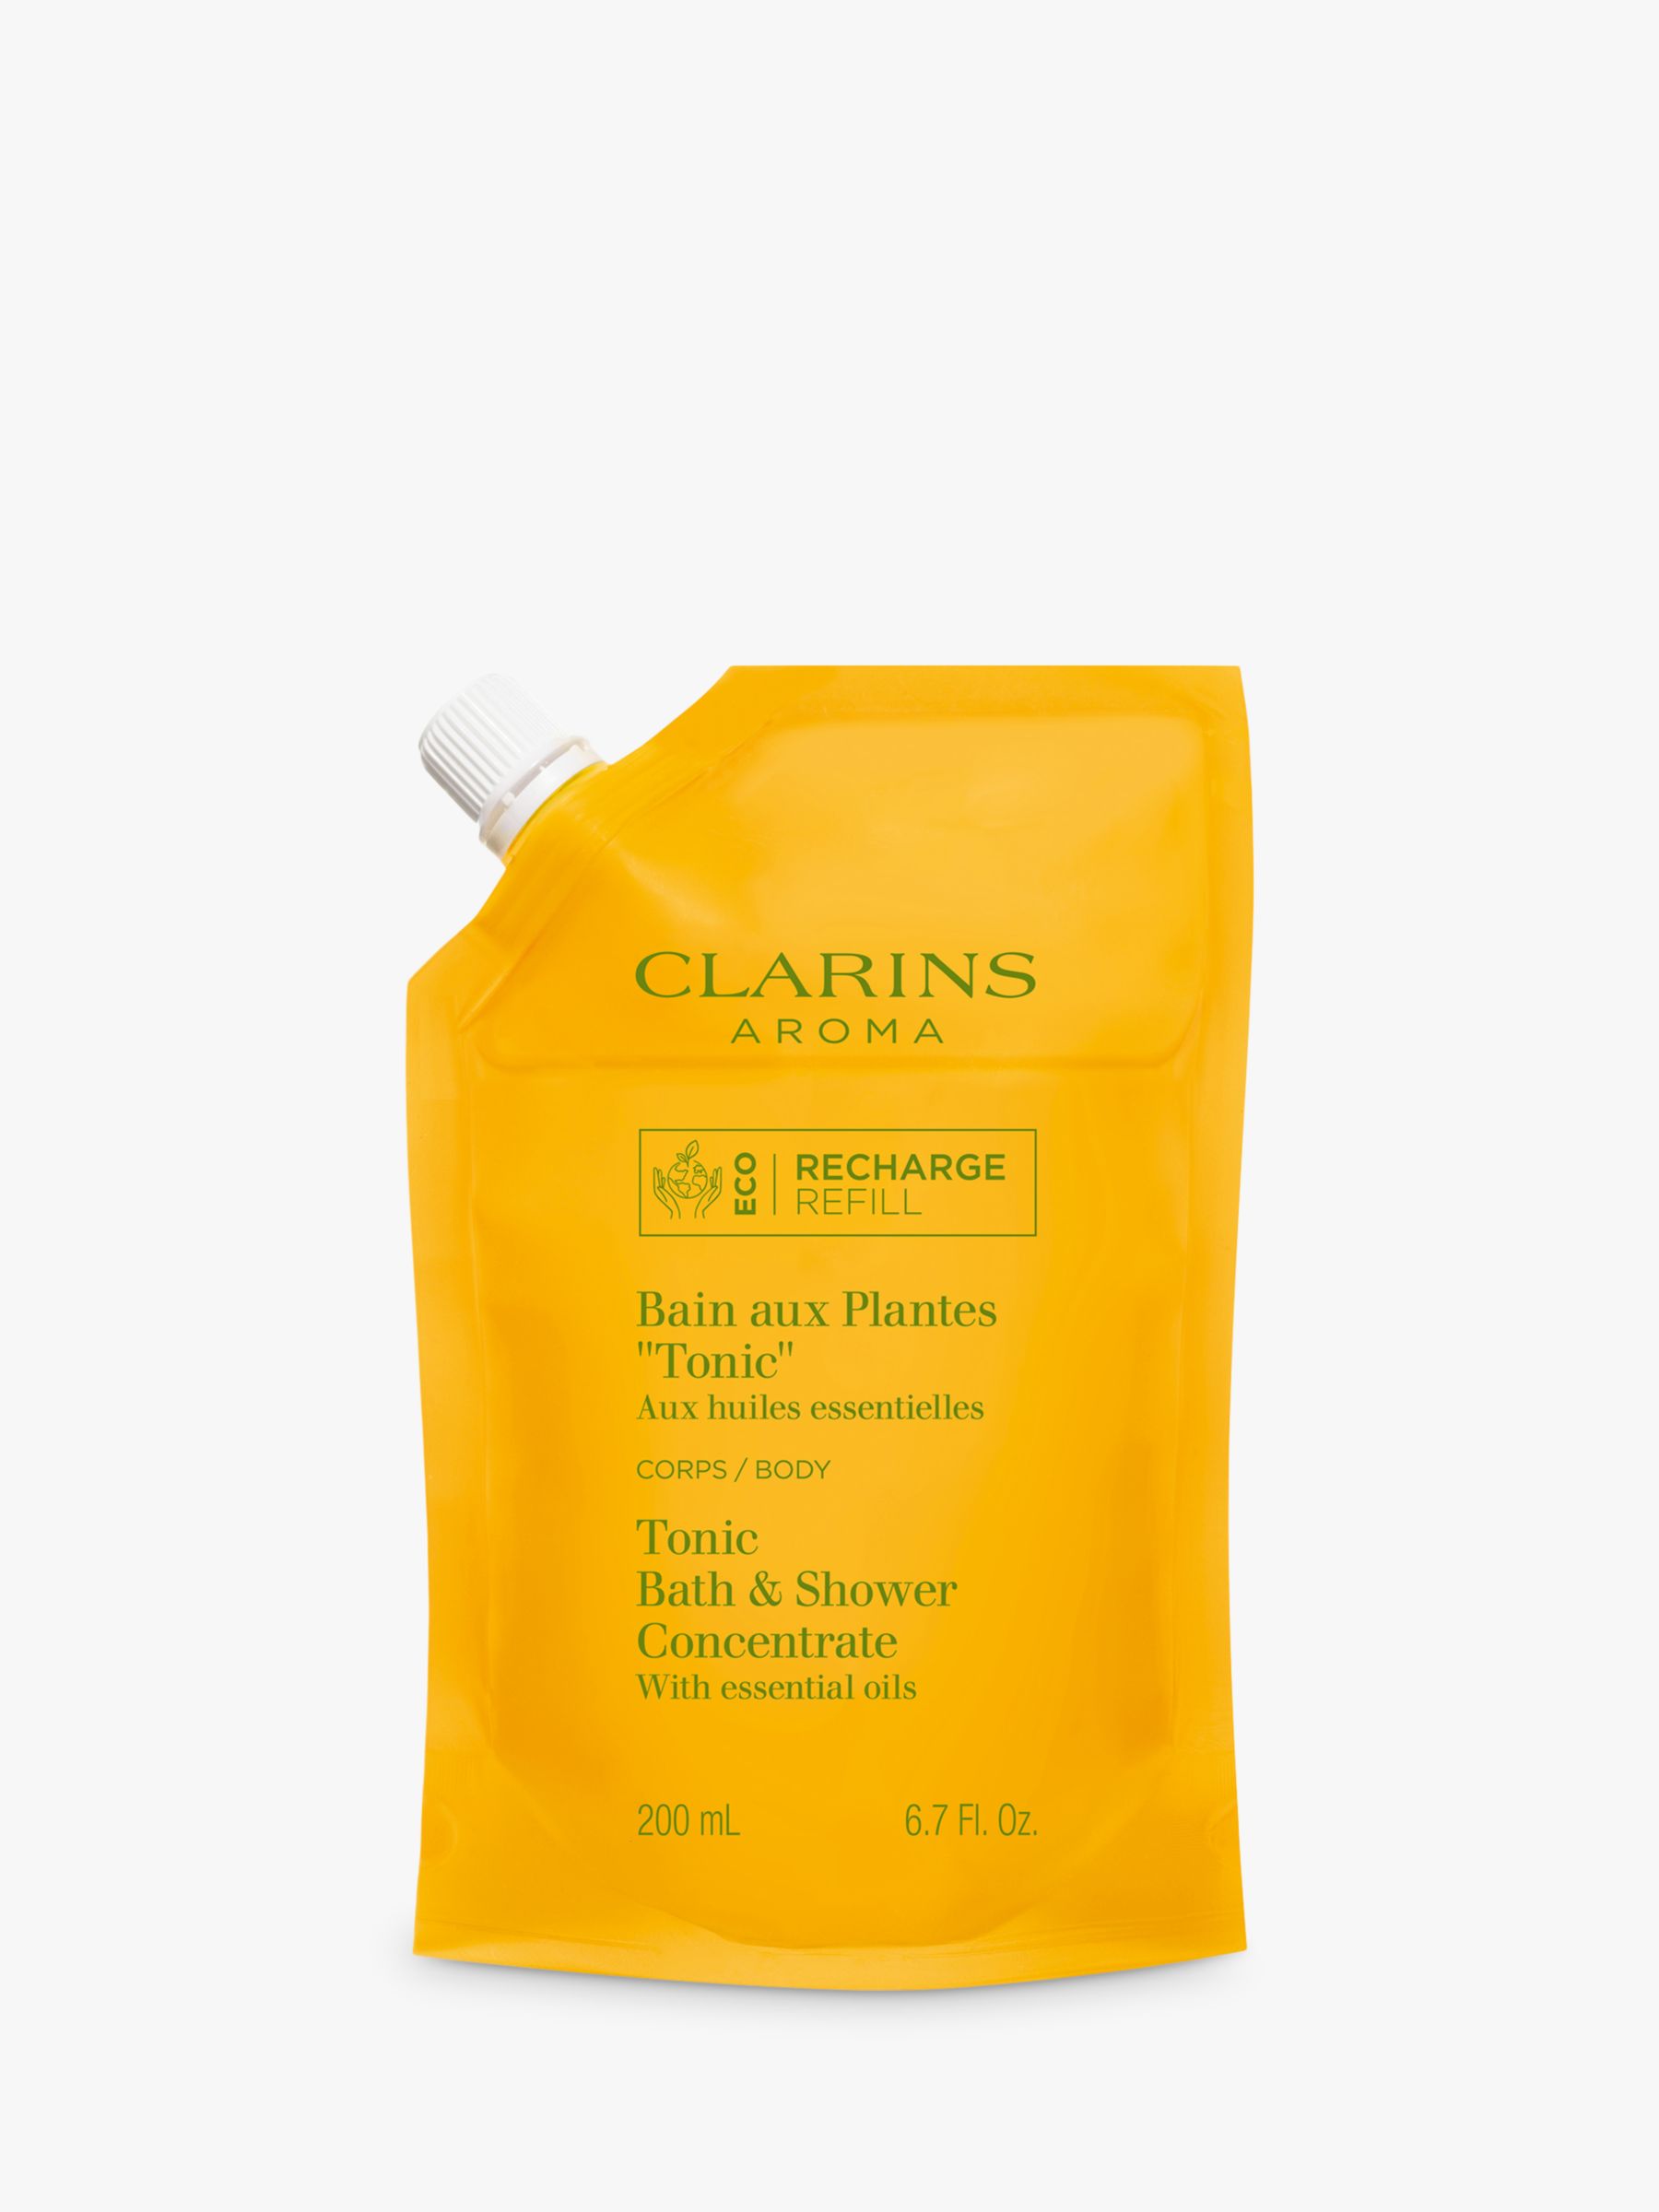 Clarins Tonic Bath & Shower Concentrate Eco Refill, 200ml